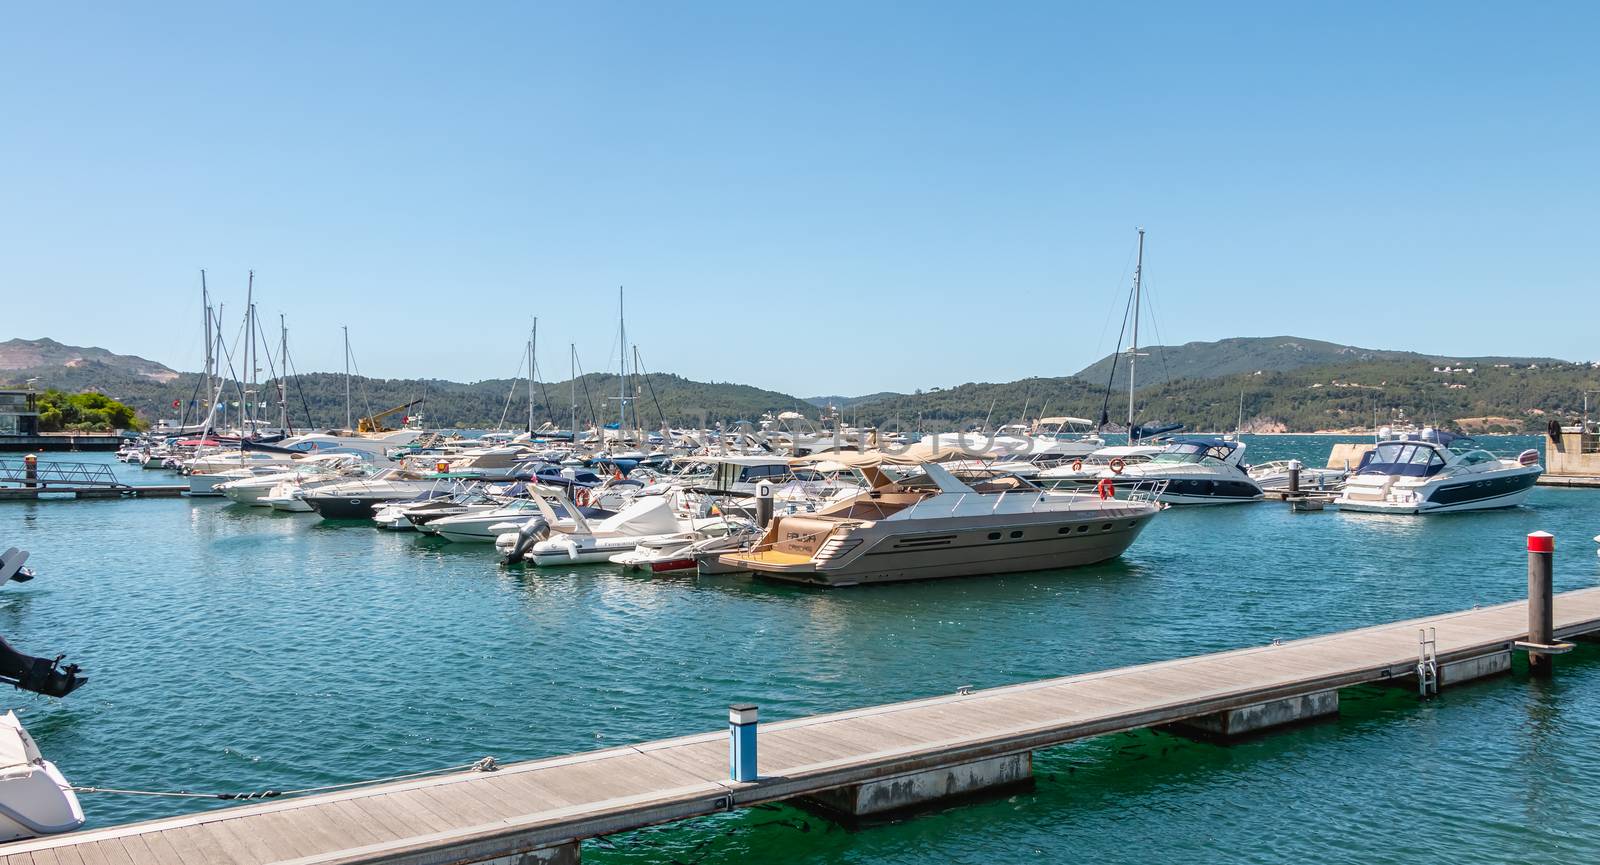 Troia, Portugal - August 9, 2018: View of the Troia Marina with its luxurious boats on a summer day